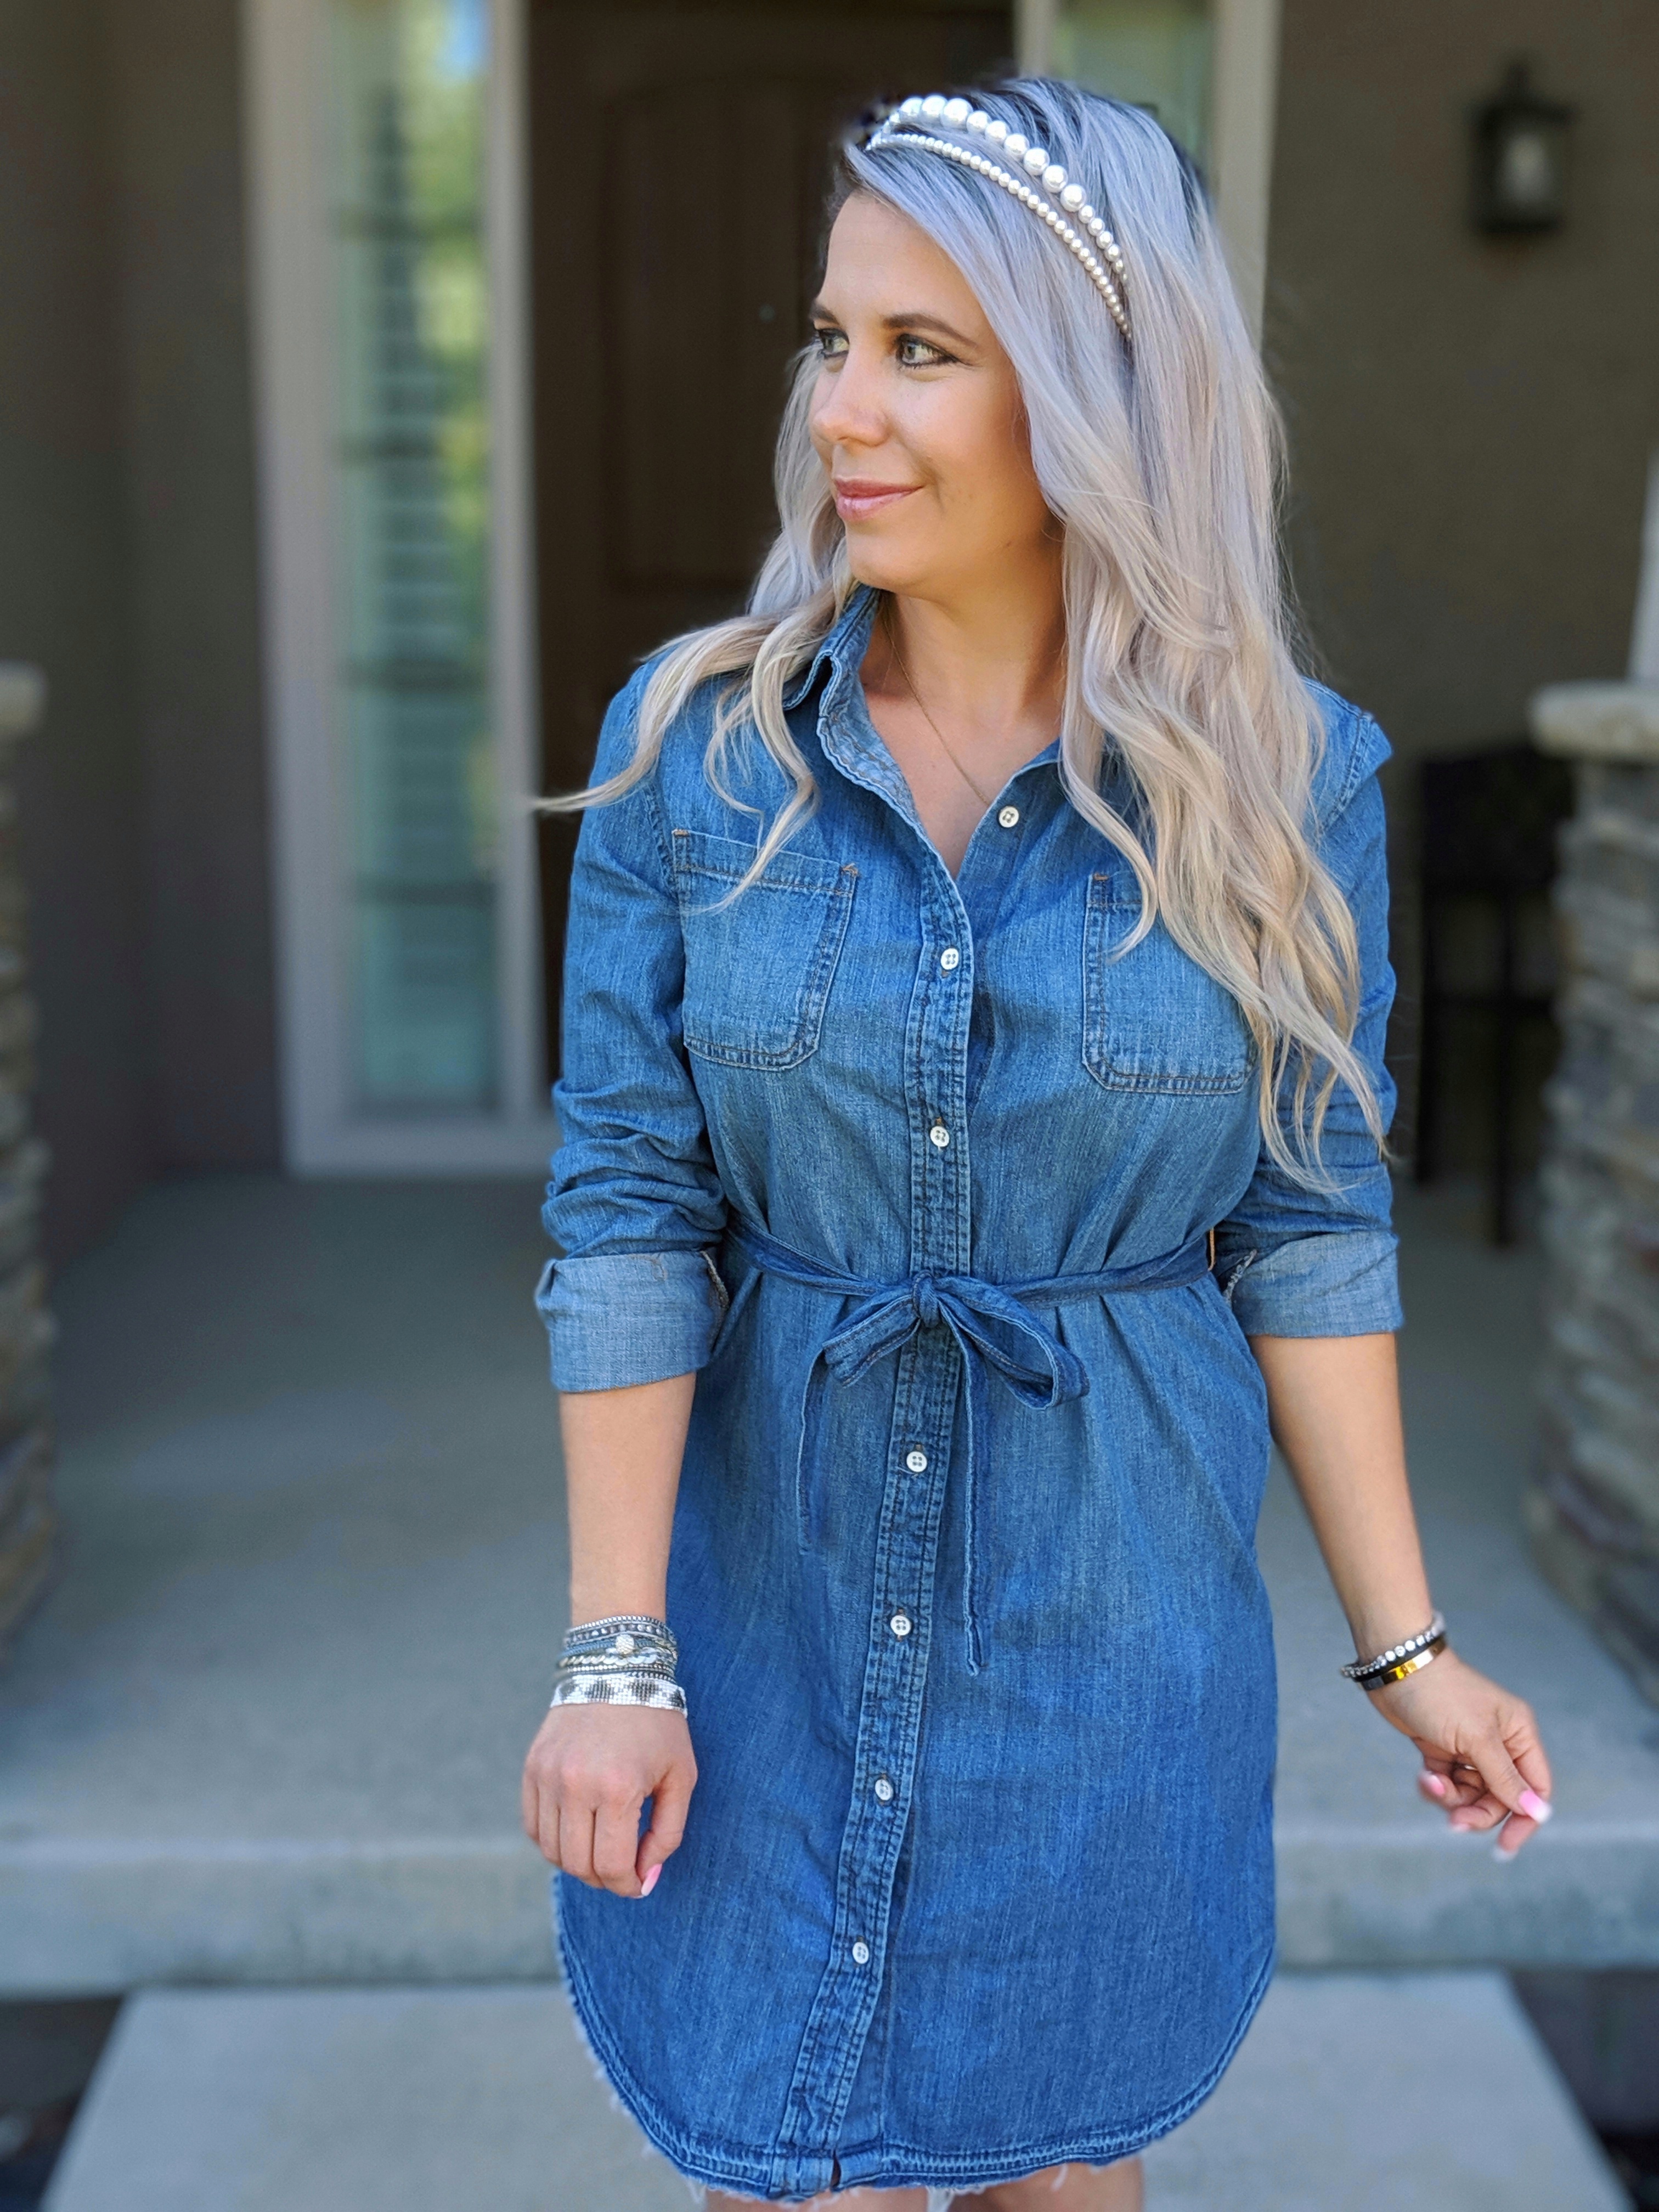 Chambray Dress Outfit Ideas | vlr.eng.br